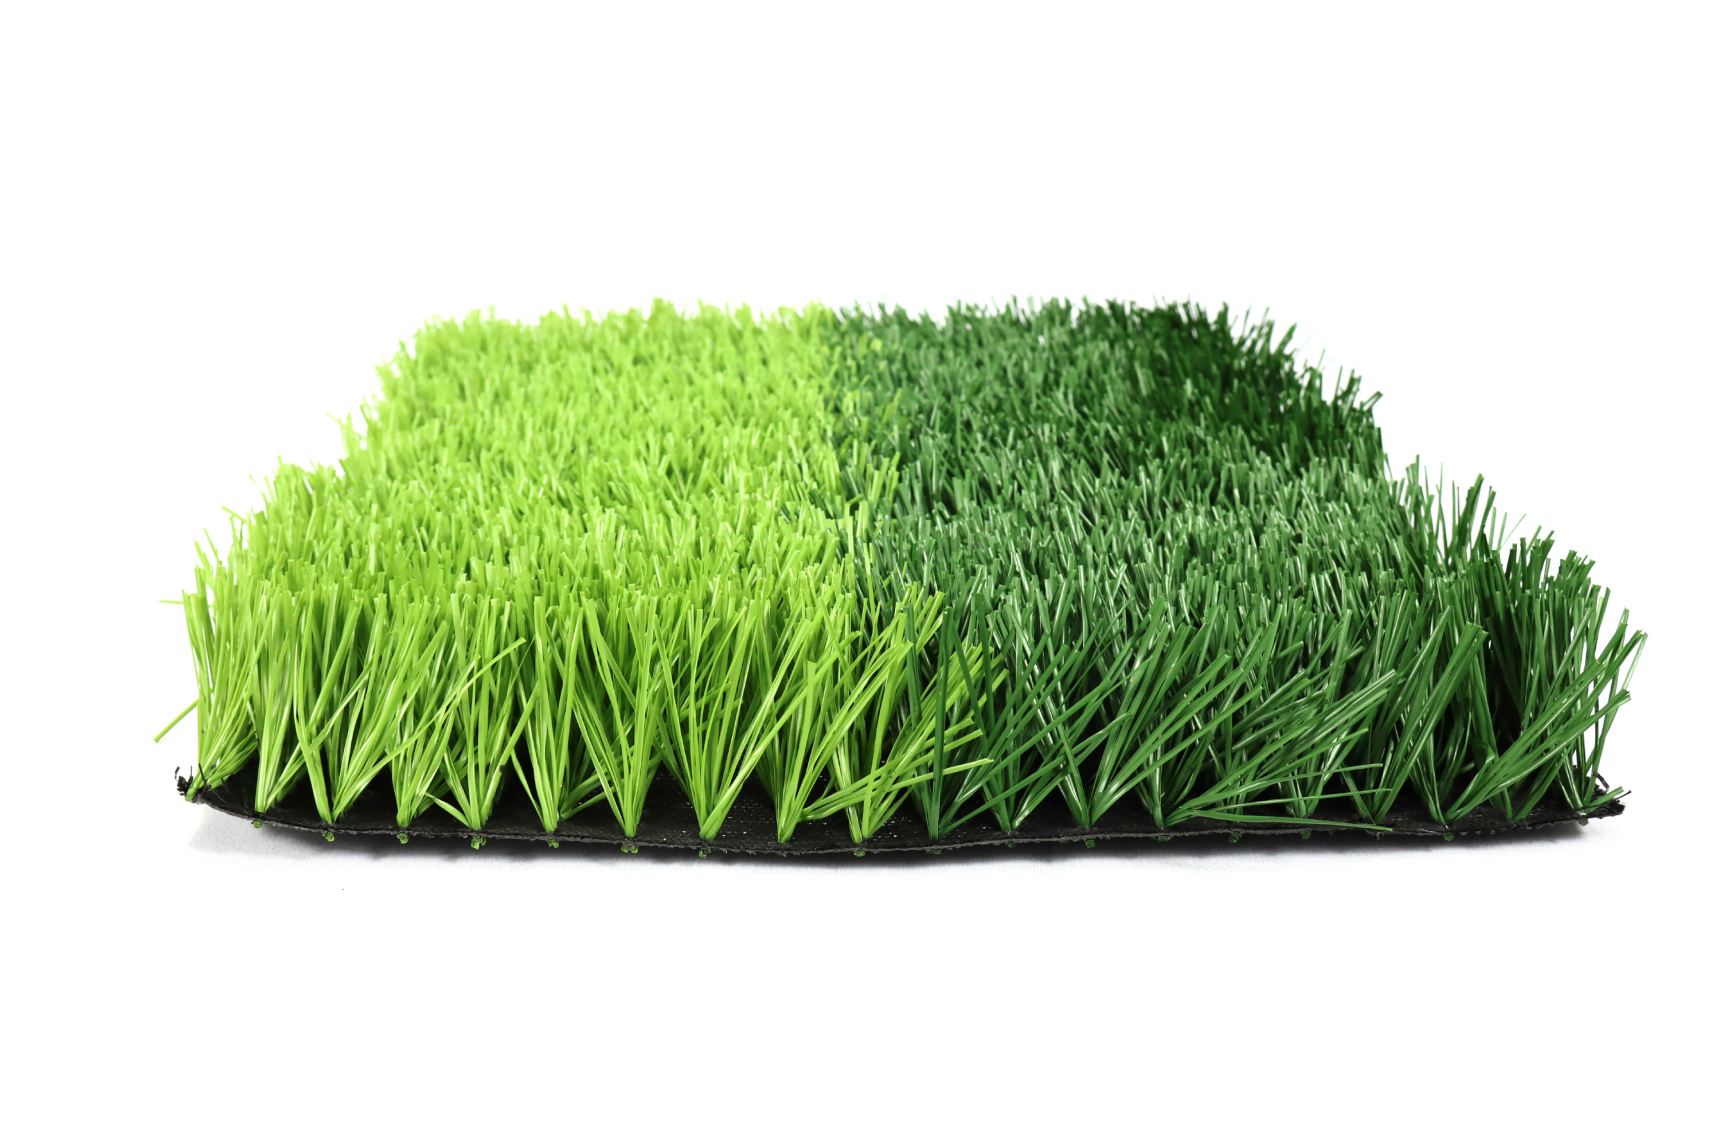 natural artificial synthetic grass fake turf lawn tile free sample luxury green gym flooring carpet mat high quality